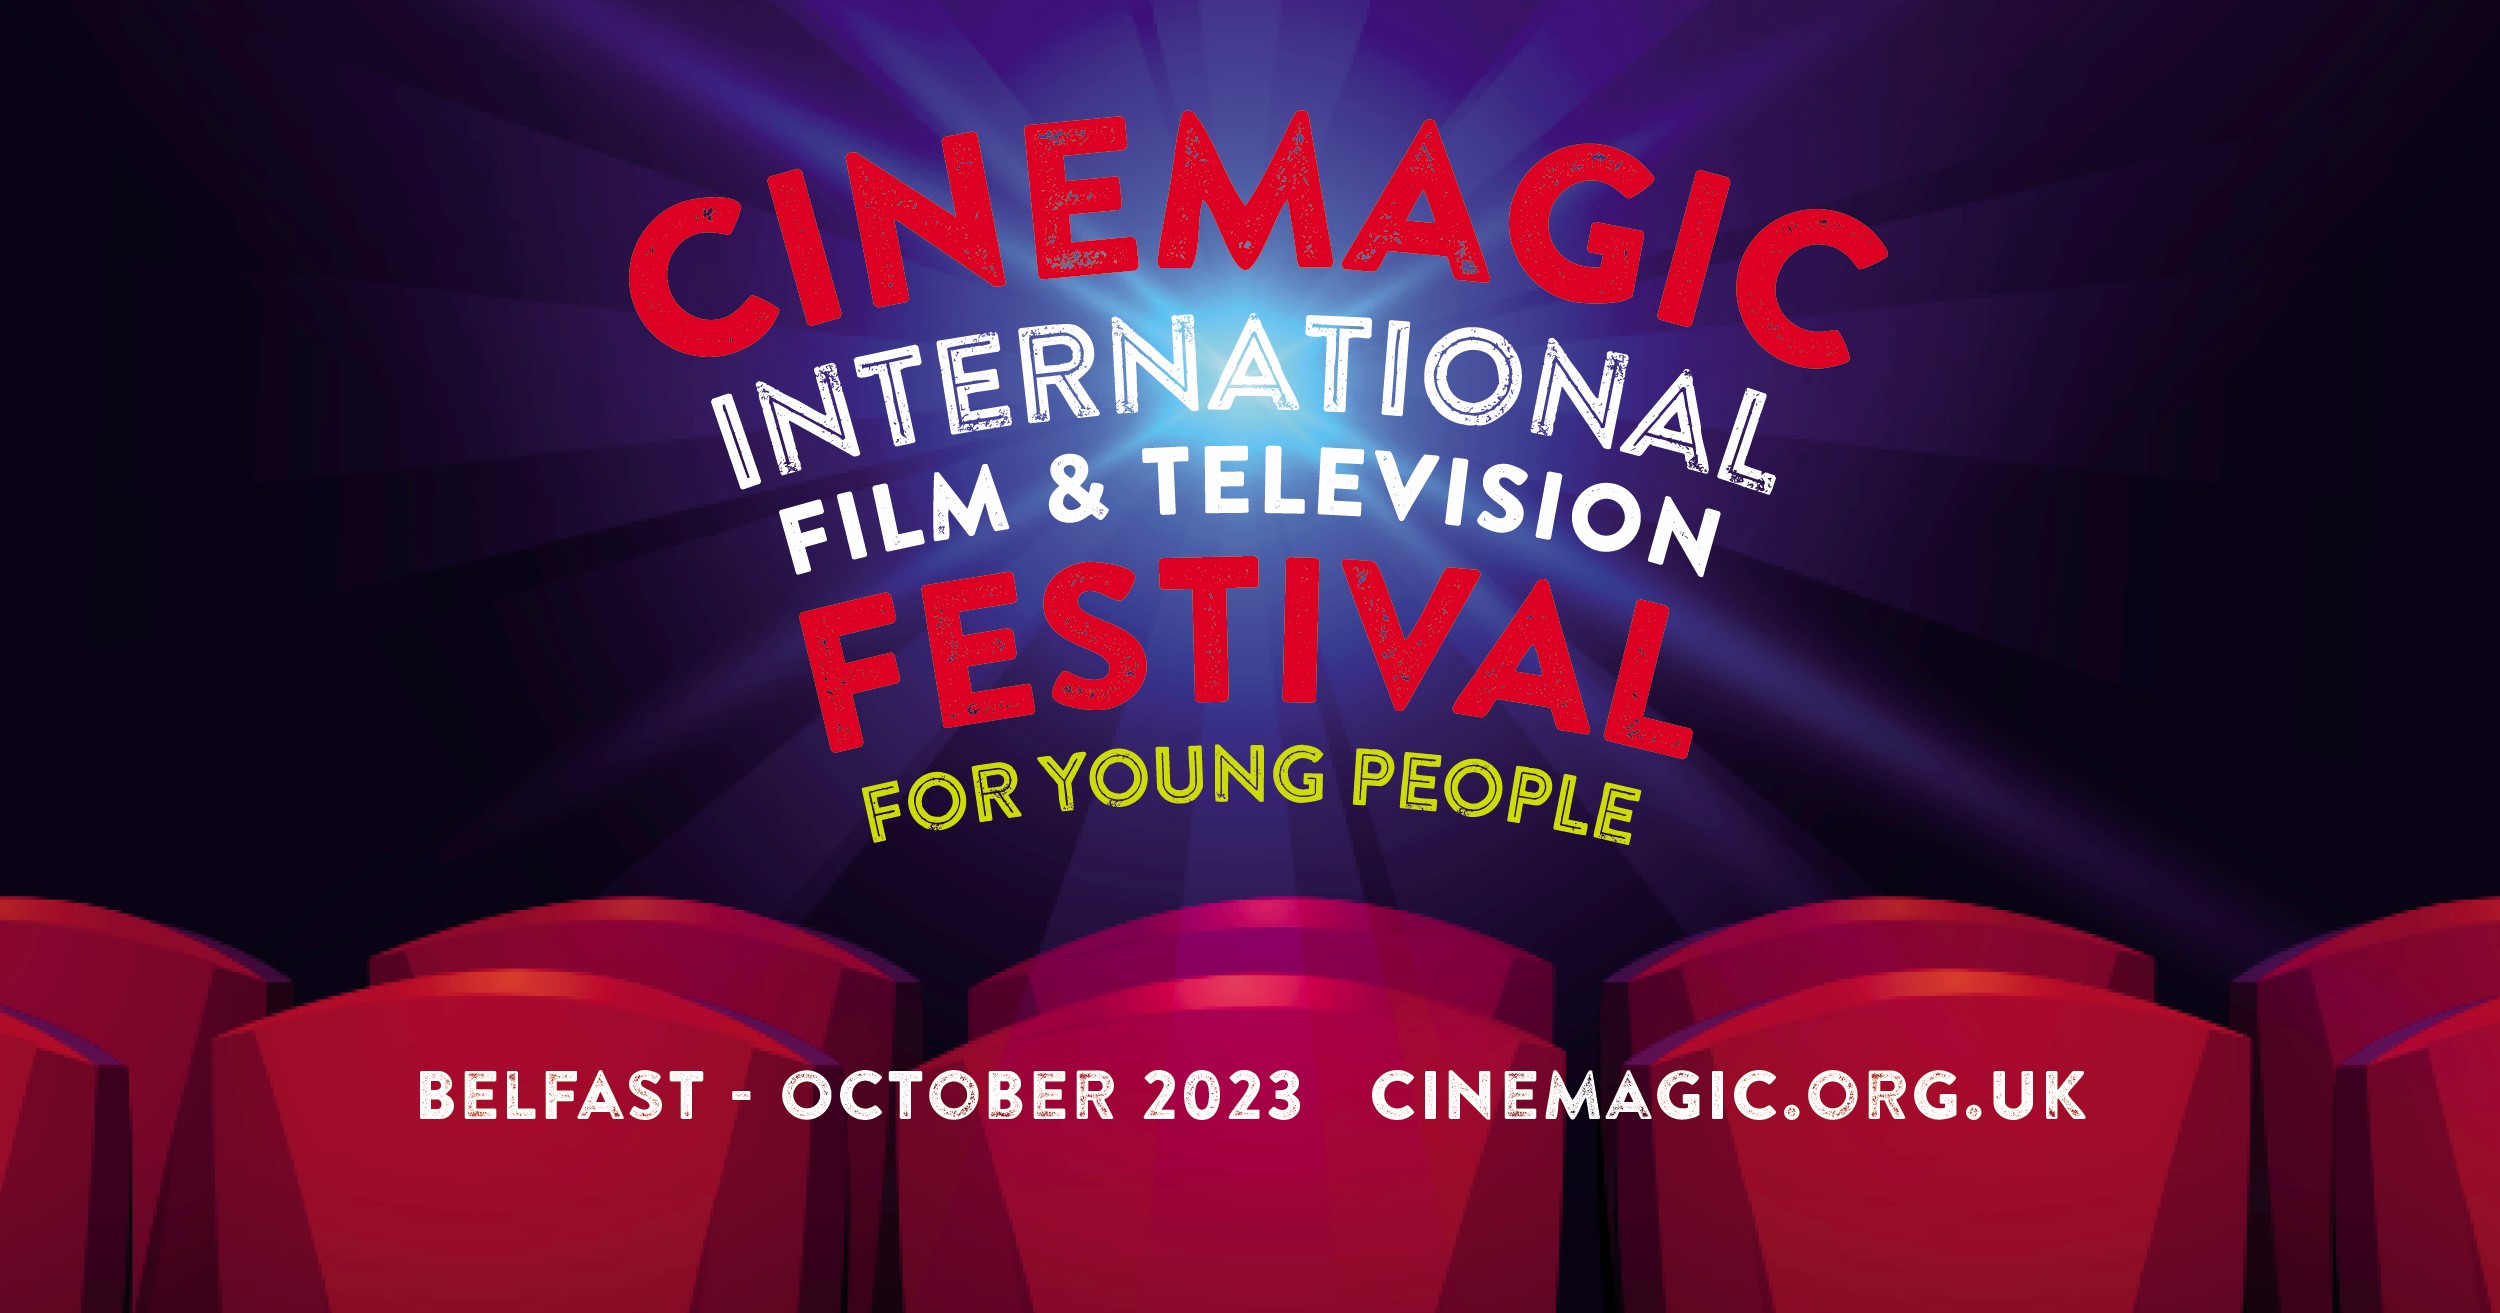 Festival Programme Unveiled for 34th Annual Cinemagic International Film and Television Festival for Young People!